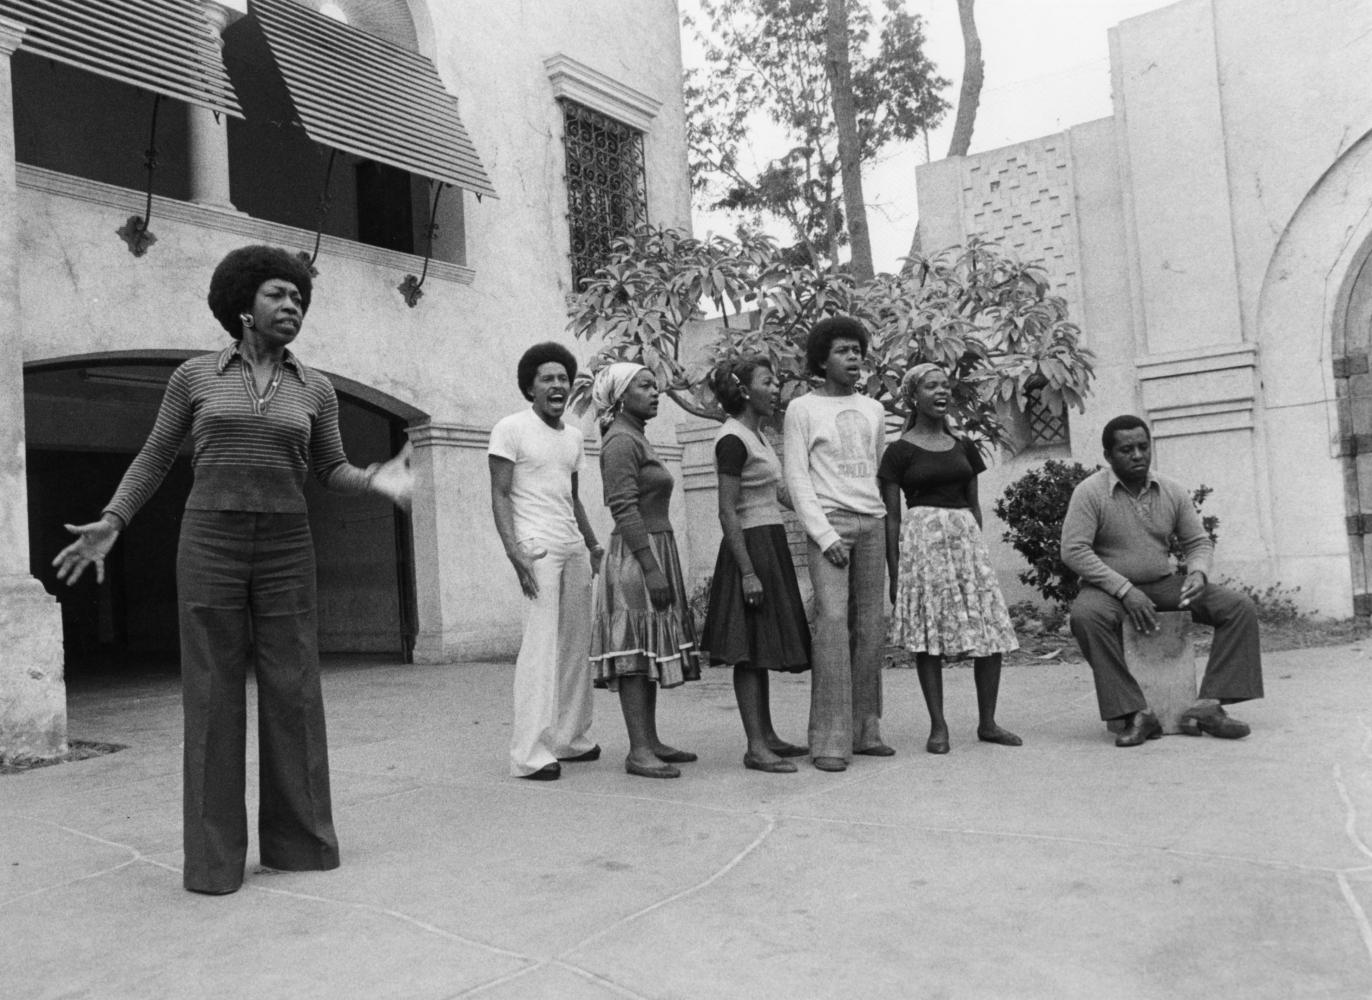 Victoria Santa Cruz and her folklore ensemble in the performance Me gritaron negra (They shouted black at me). Odin Teatret Archives, Ayacucho, Peru, 1978